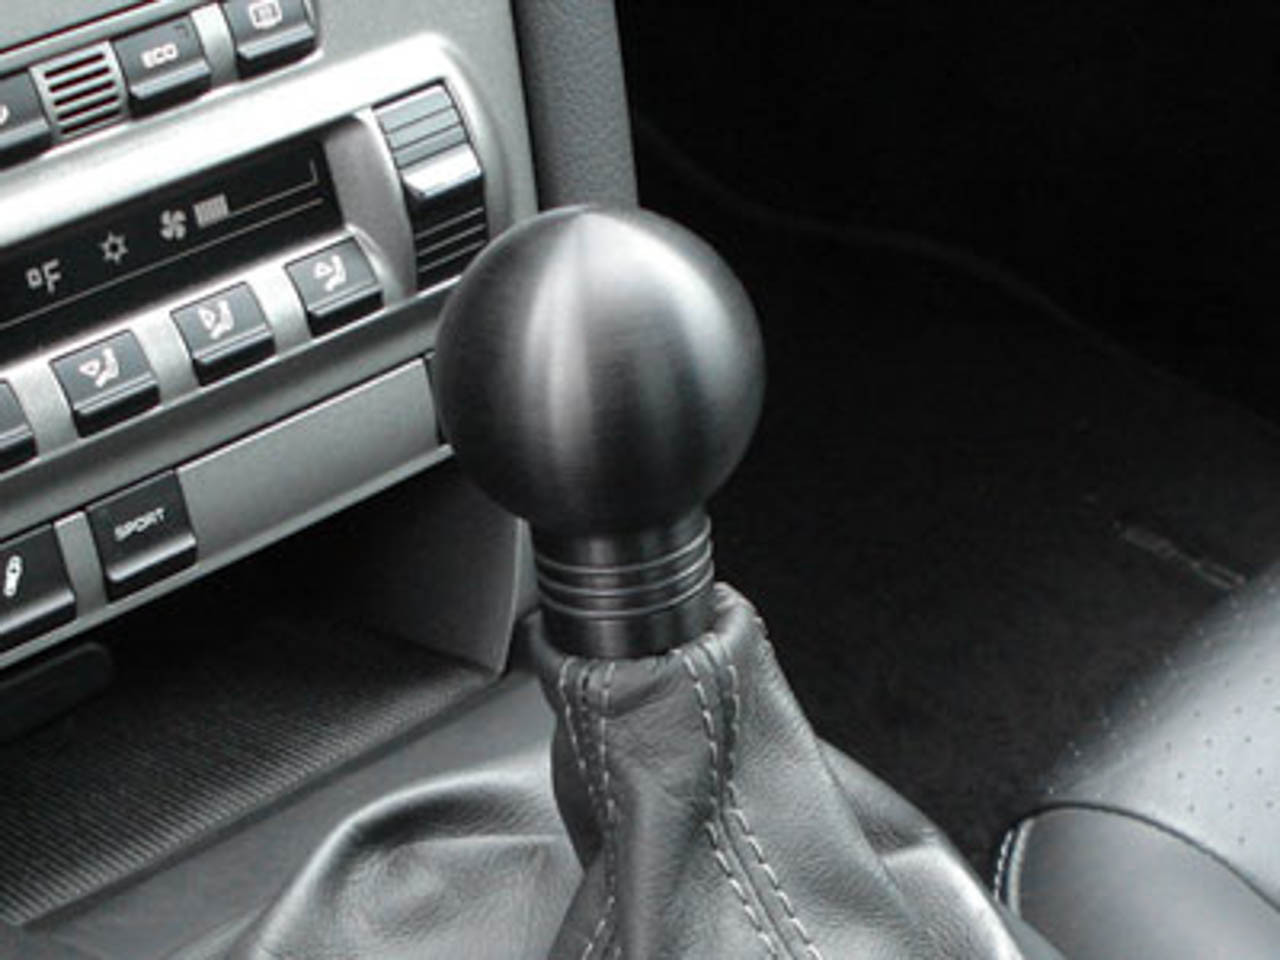 gear knob cover, gear knob cover Suppliers and Manufacturers at